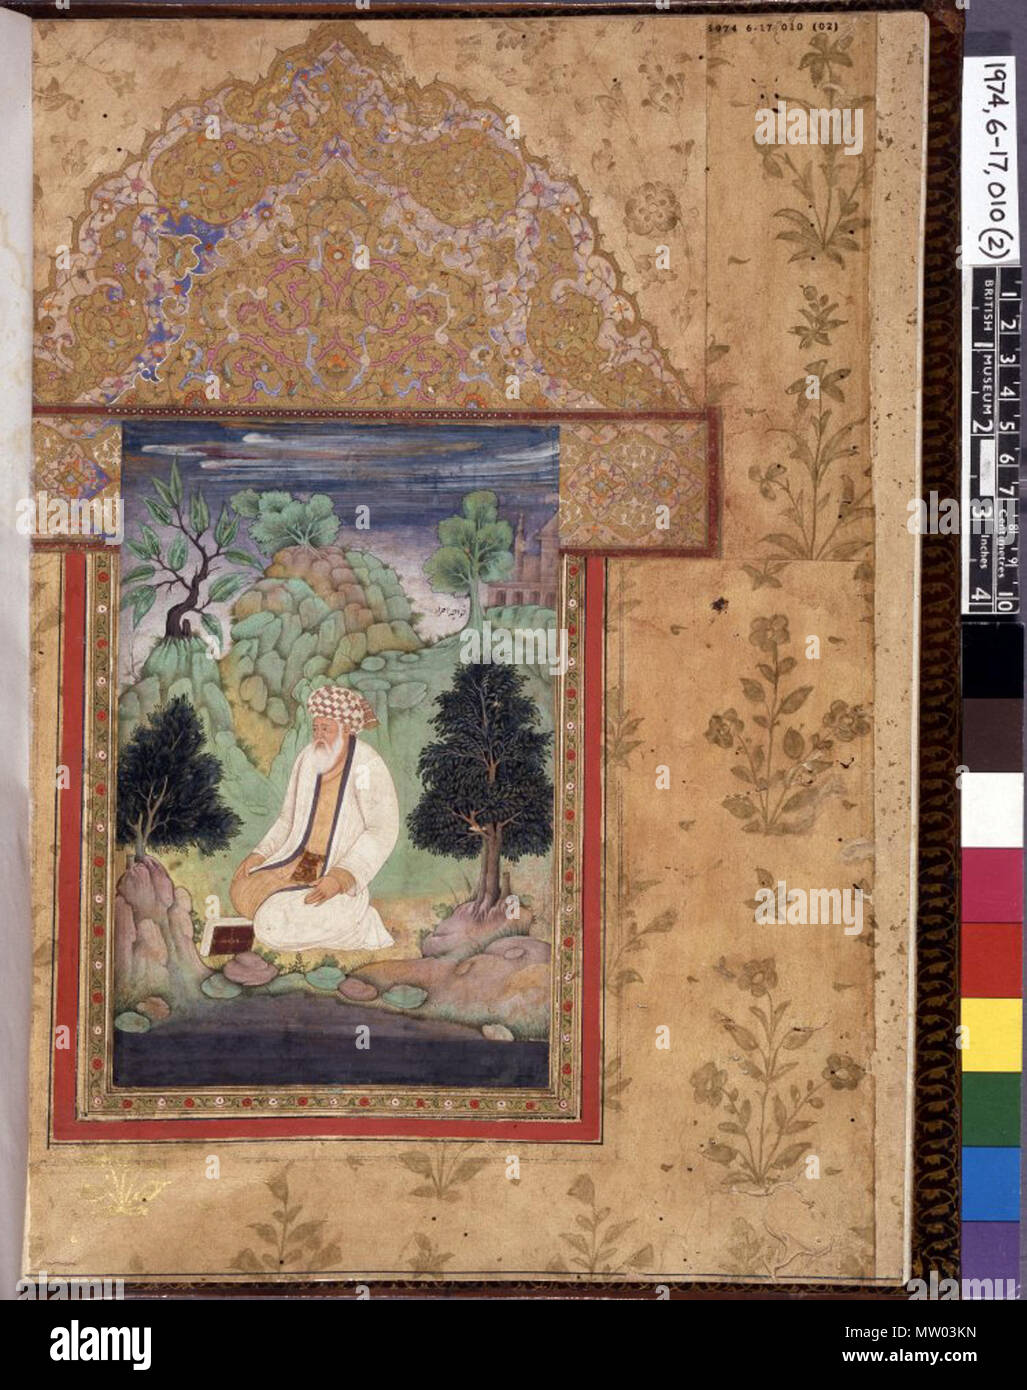 . English: Album Leaf (verso), painting on paper. Devotion. Shaykh Khwaja Ahrar seated by a stream. Inscribed. According to register, folio 1. See 1974,0617,0.10 for album description. 17thC 19thC. Khwajeh Awár 554 Shaykh Khwaja Ahrar Stock Photo